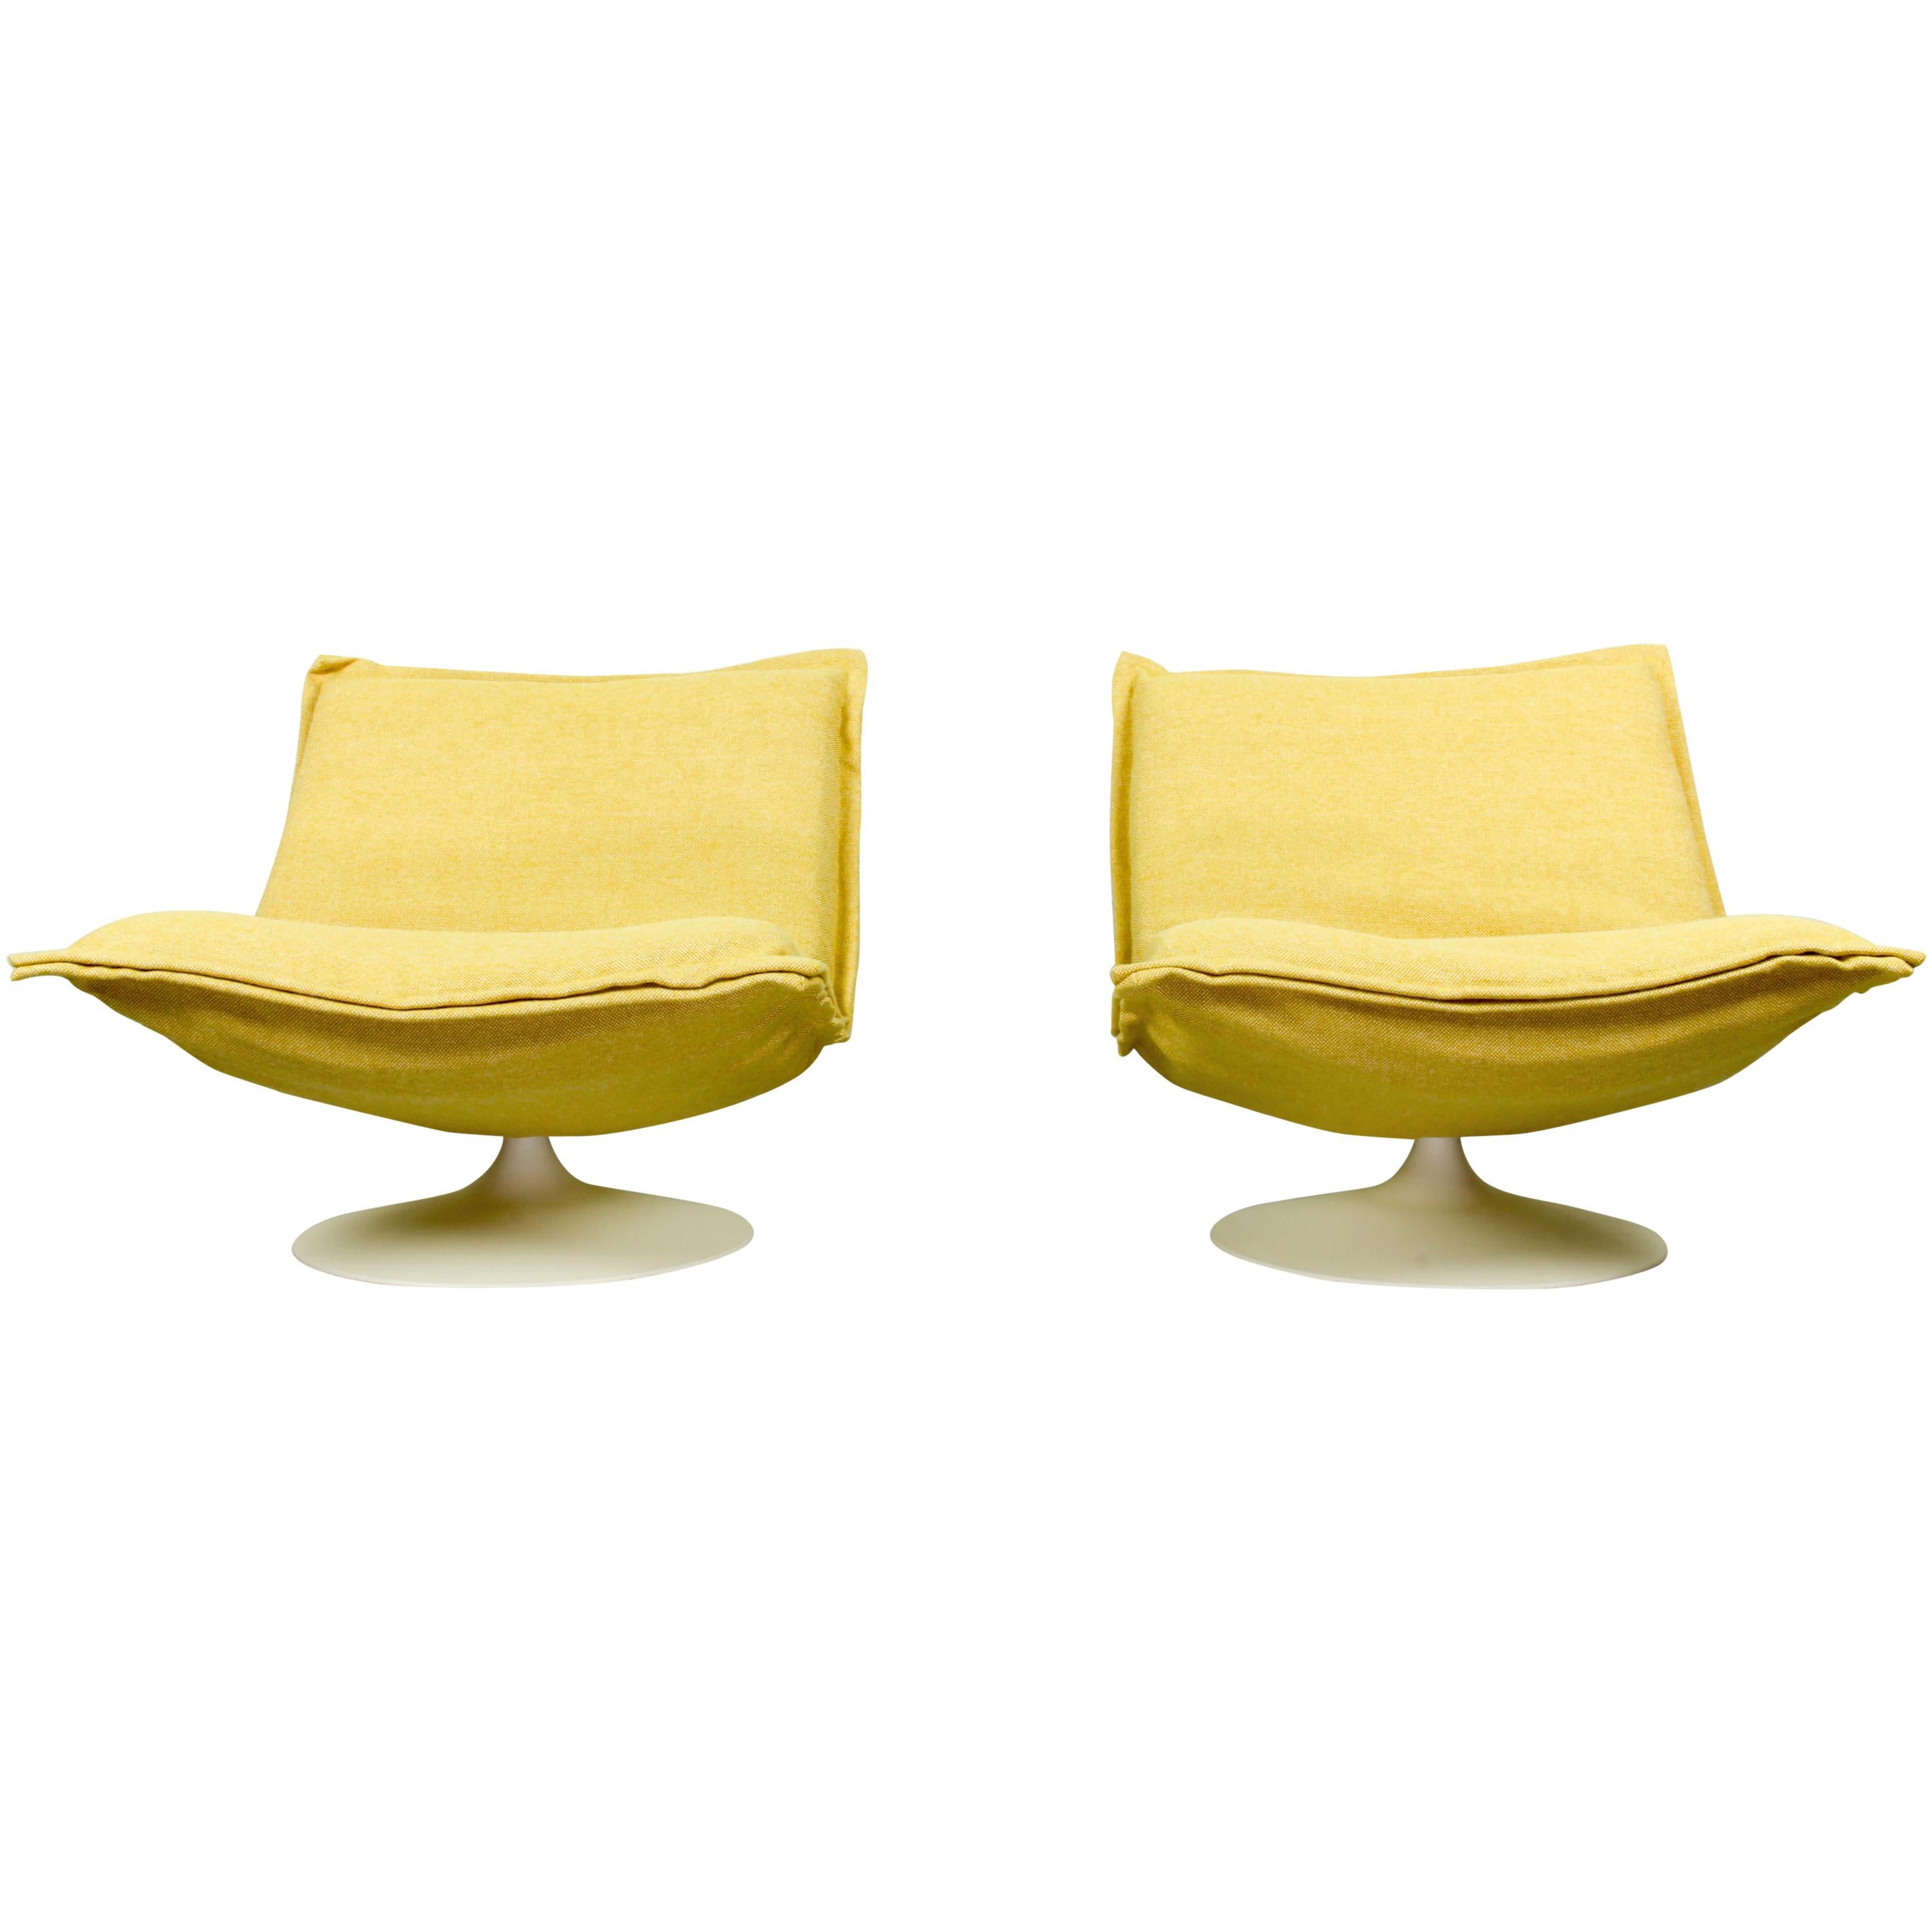 Set of 2 vintage Lounge Chairs F980 by Harcourt for Artifort, 1975